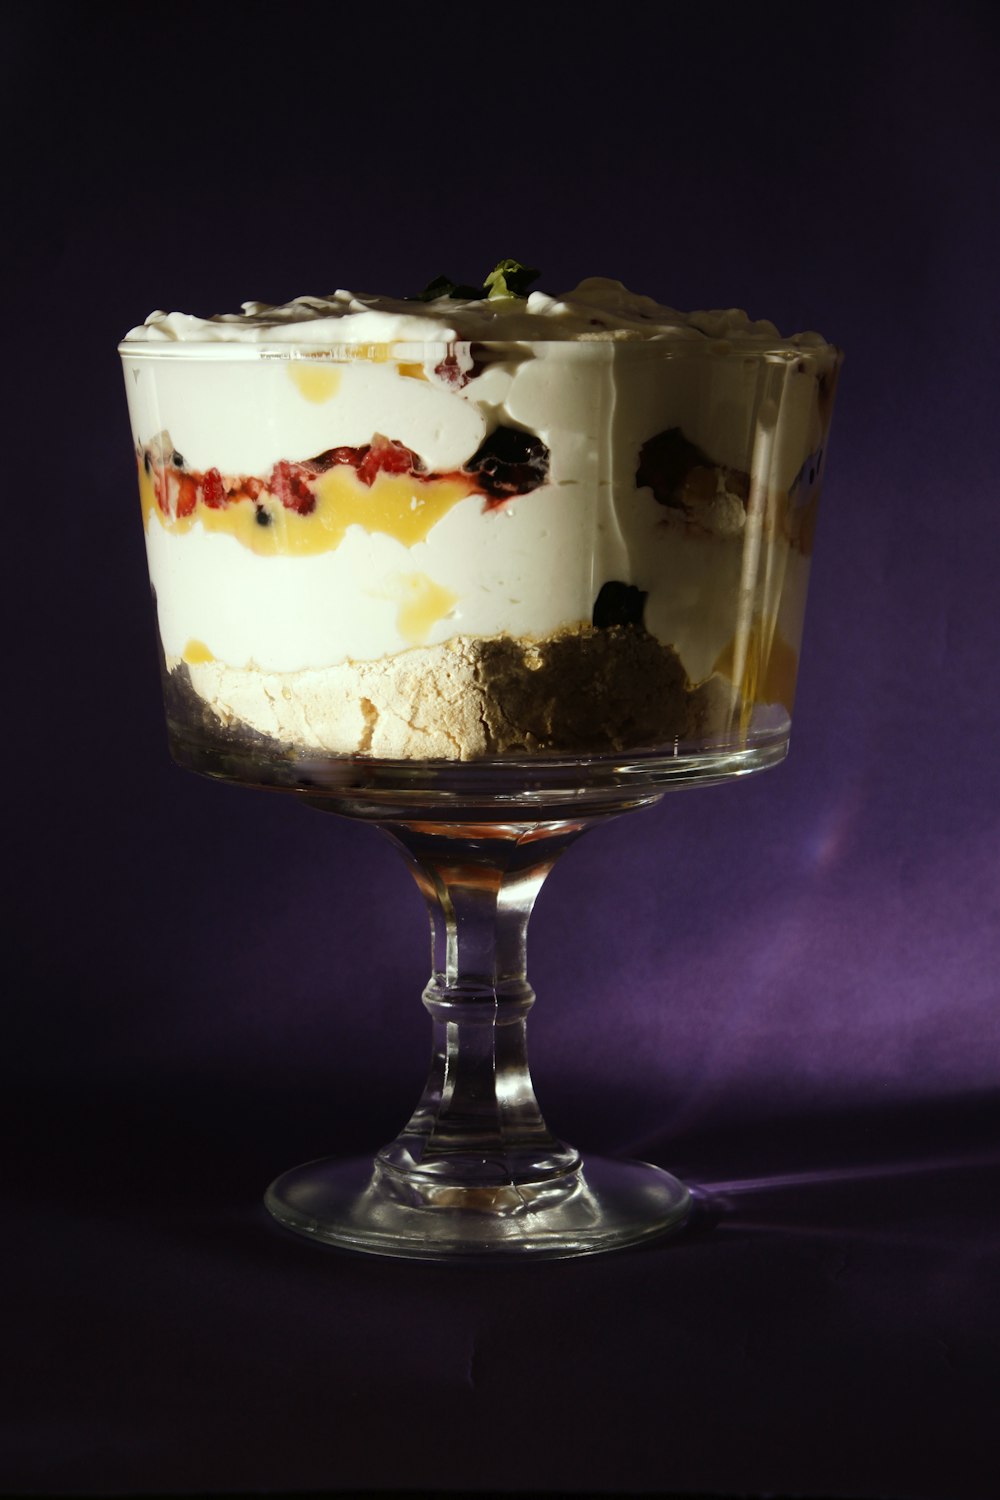 a dessert in a glass dish on a purple background